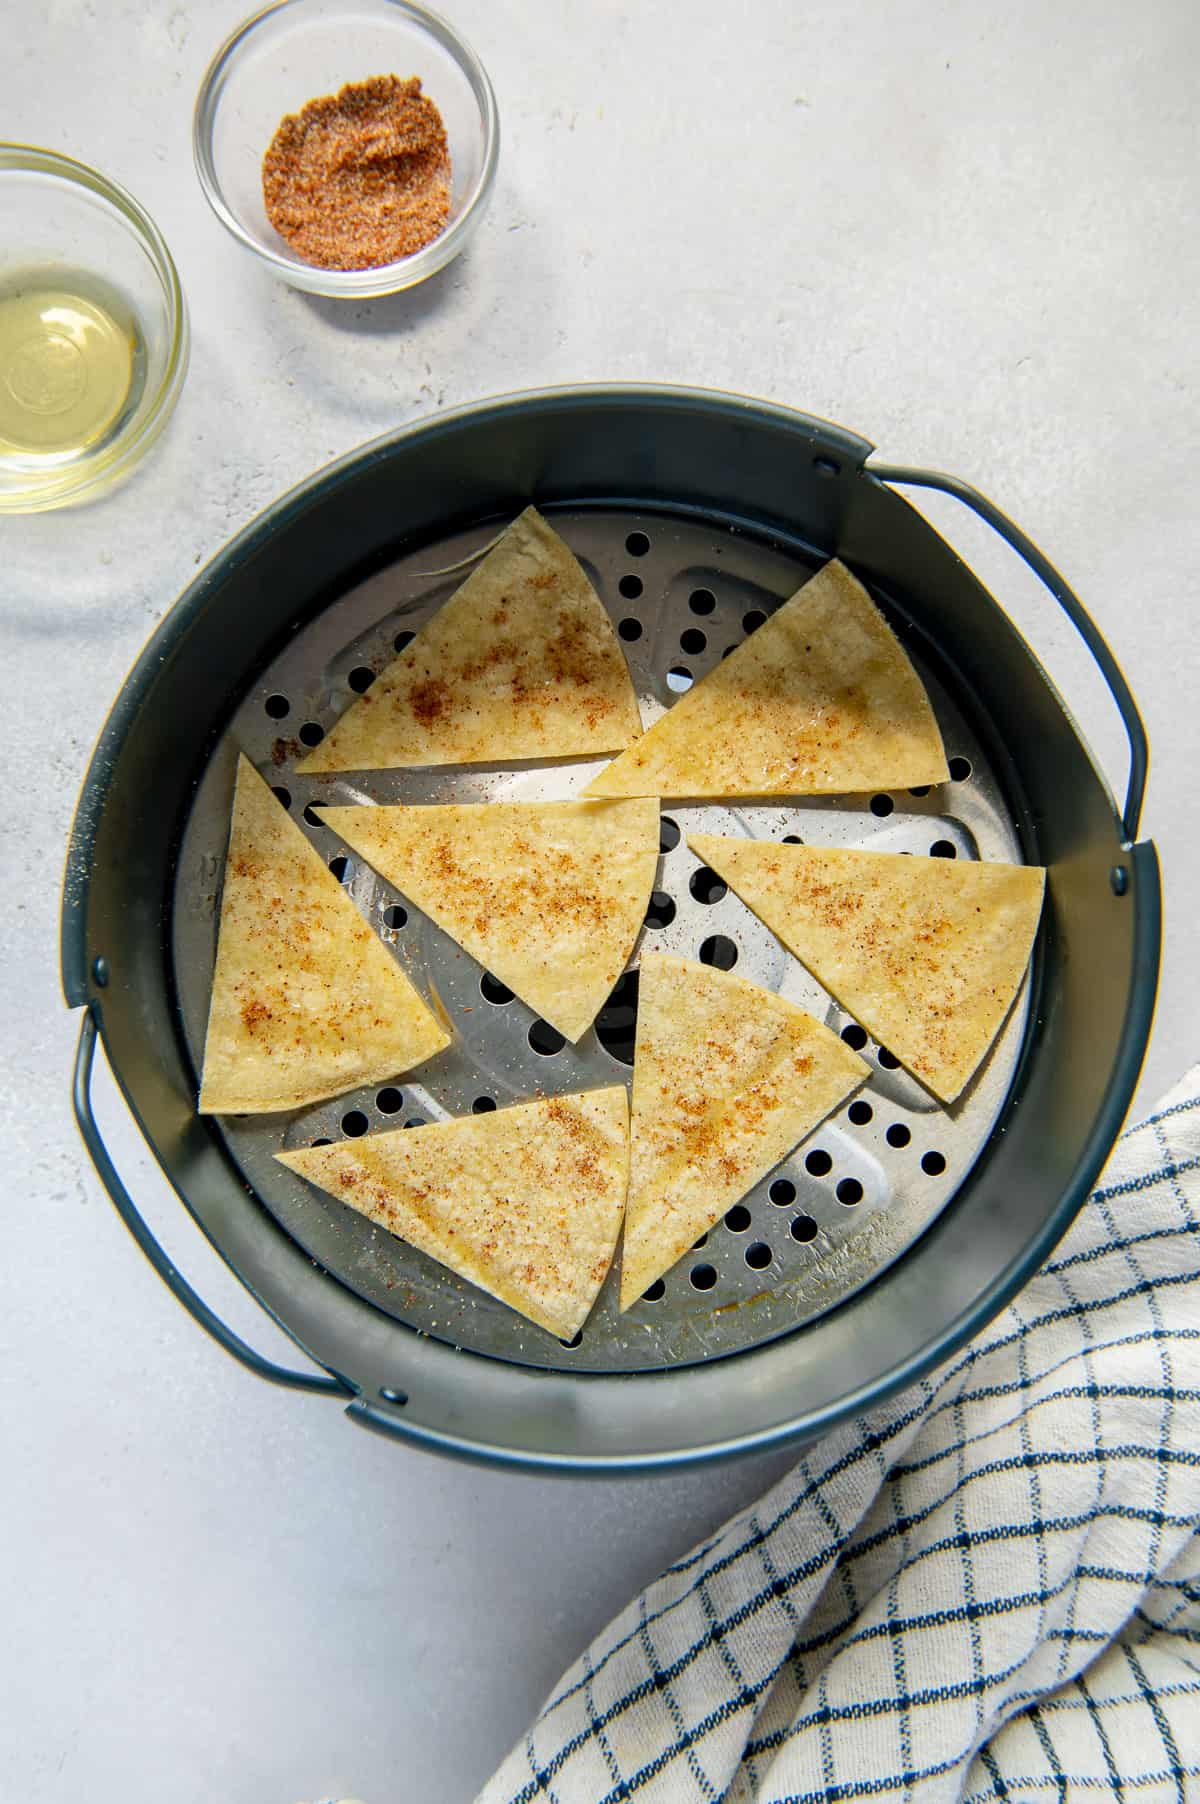 Tortilla wedges brushed with oil and sprinkled with Mexican spices in an air fryer basket.